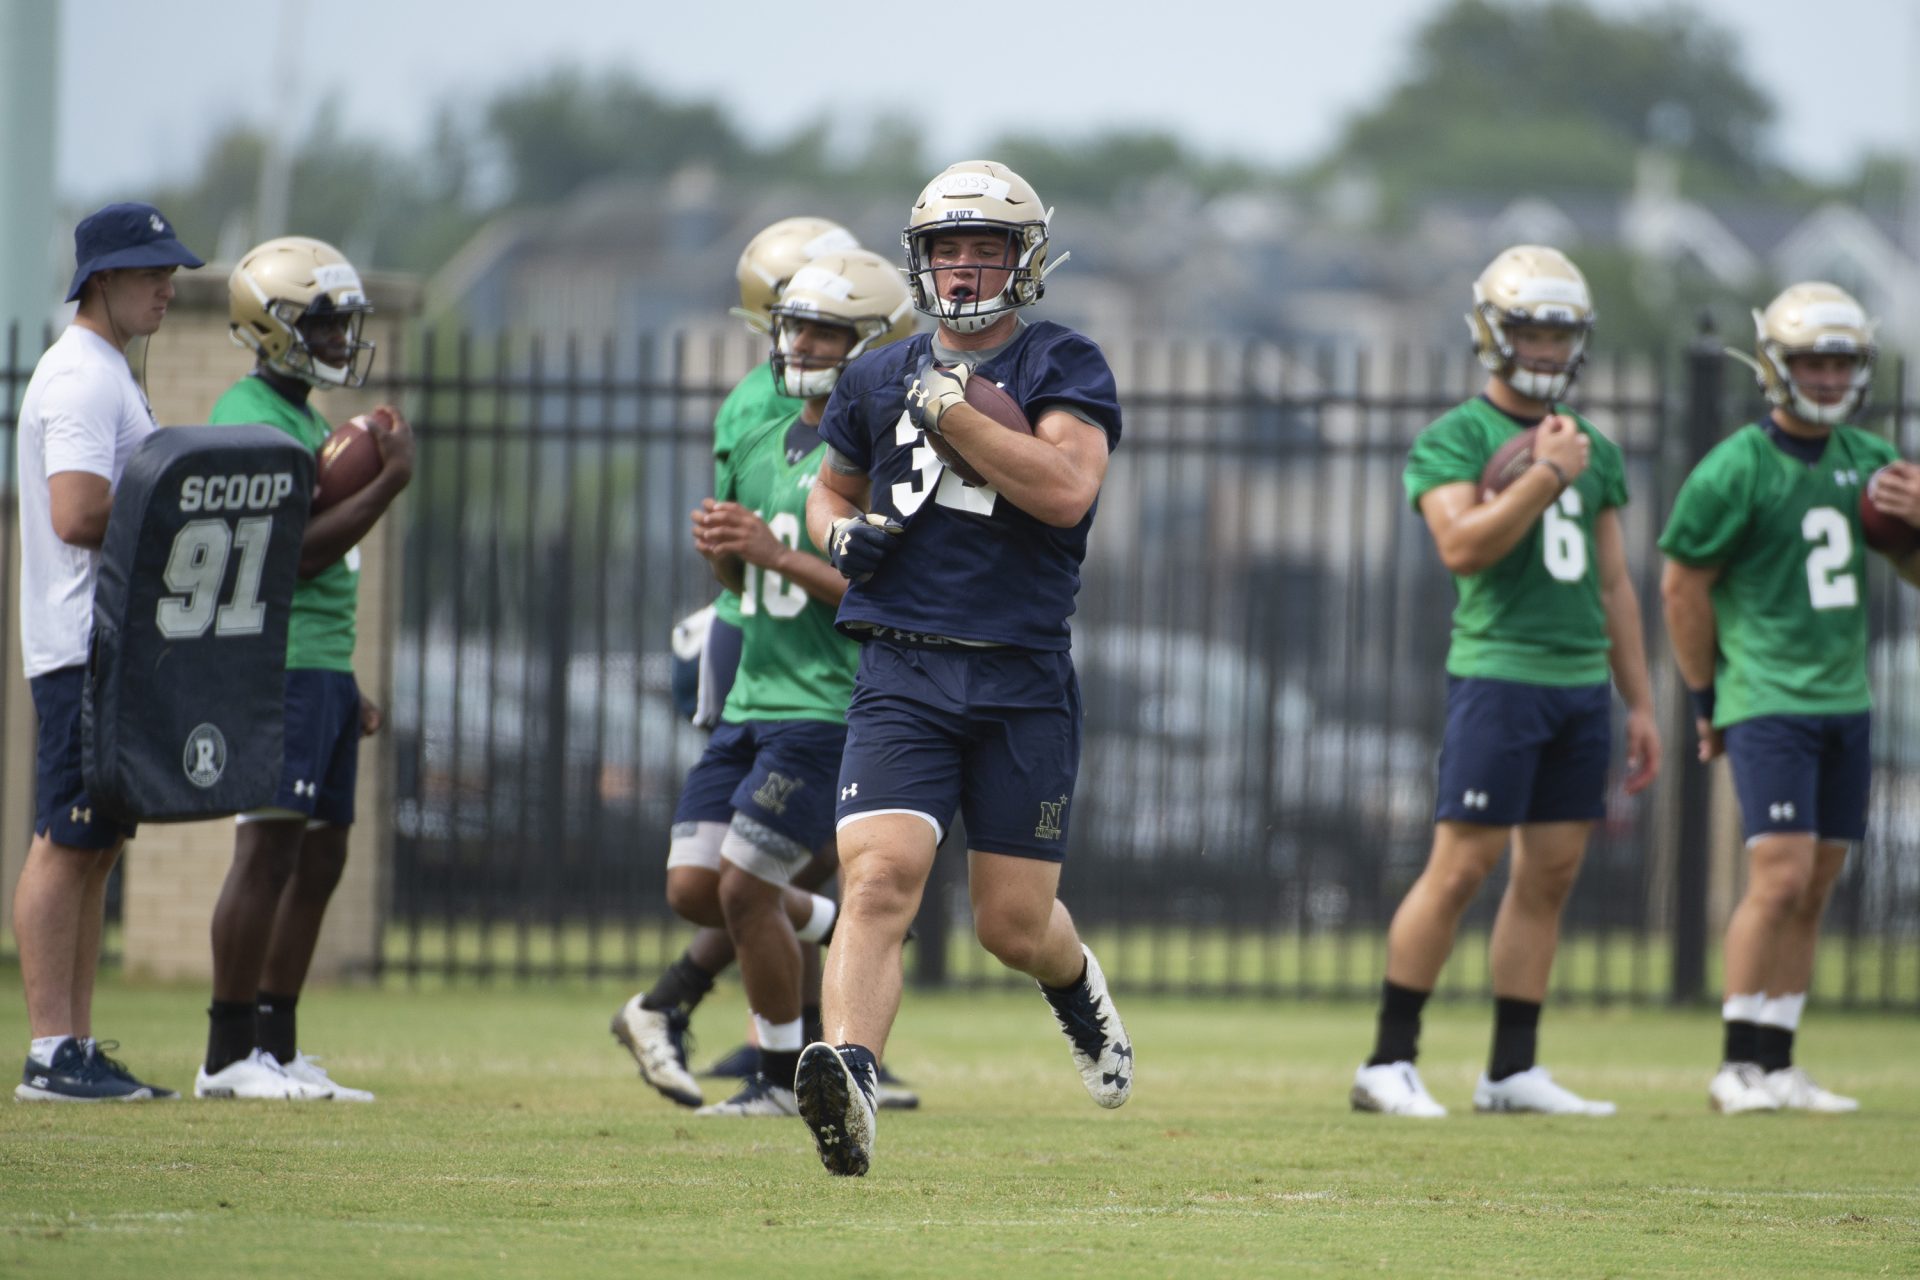 Navy fullback Isaac Ruoss runs with the ball during morning workouts NCAA college football training camp, Friday, Aug. 2, 2019, in Annapolis, Md.